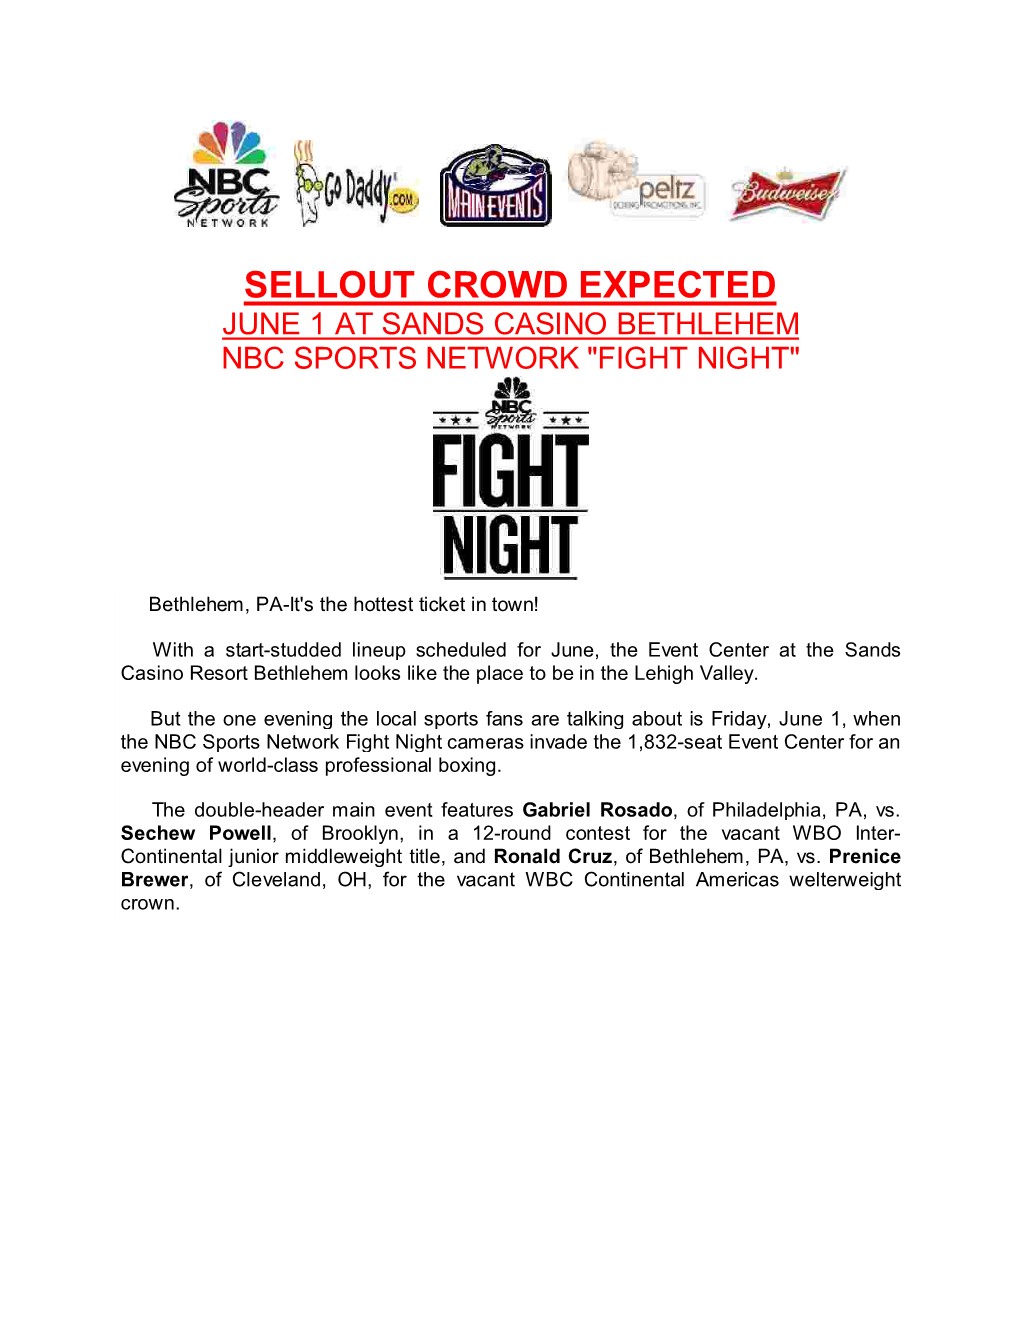 Sellout Crowd Expected June 1 at Sands Casino Bethlehem Nbc Sports Network "Fight Night"